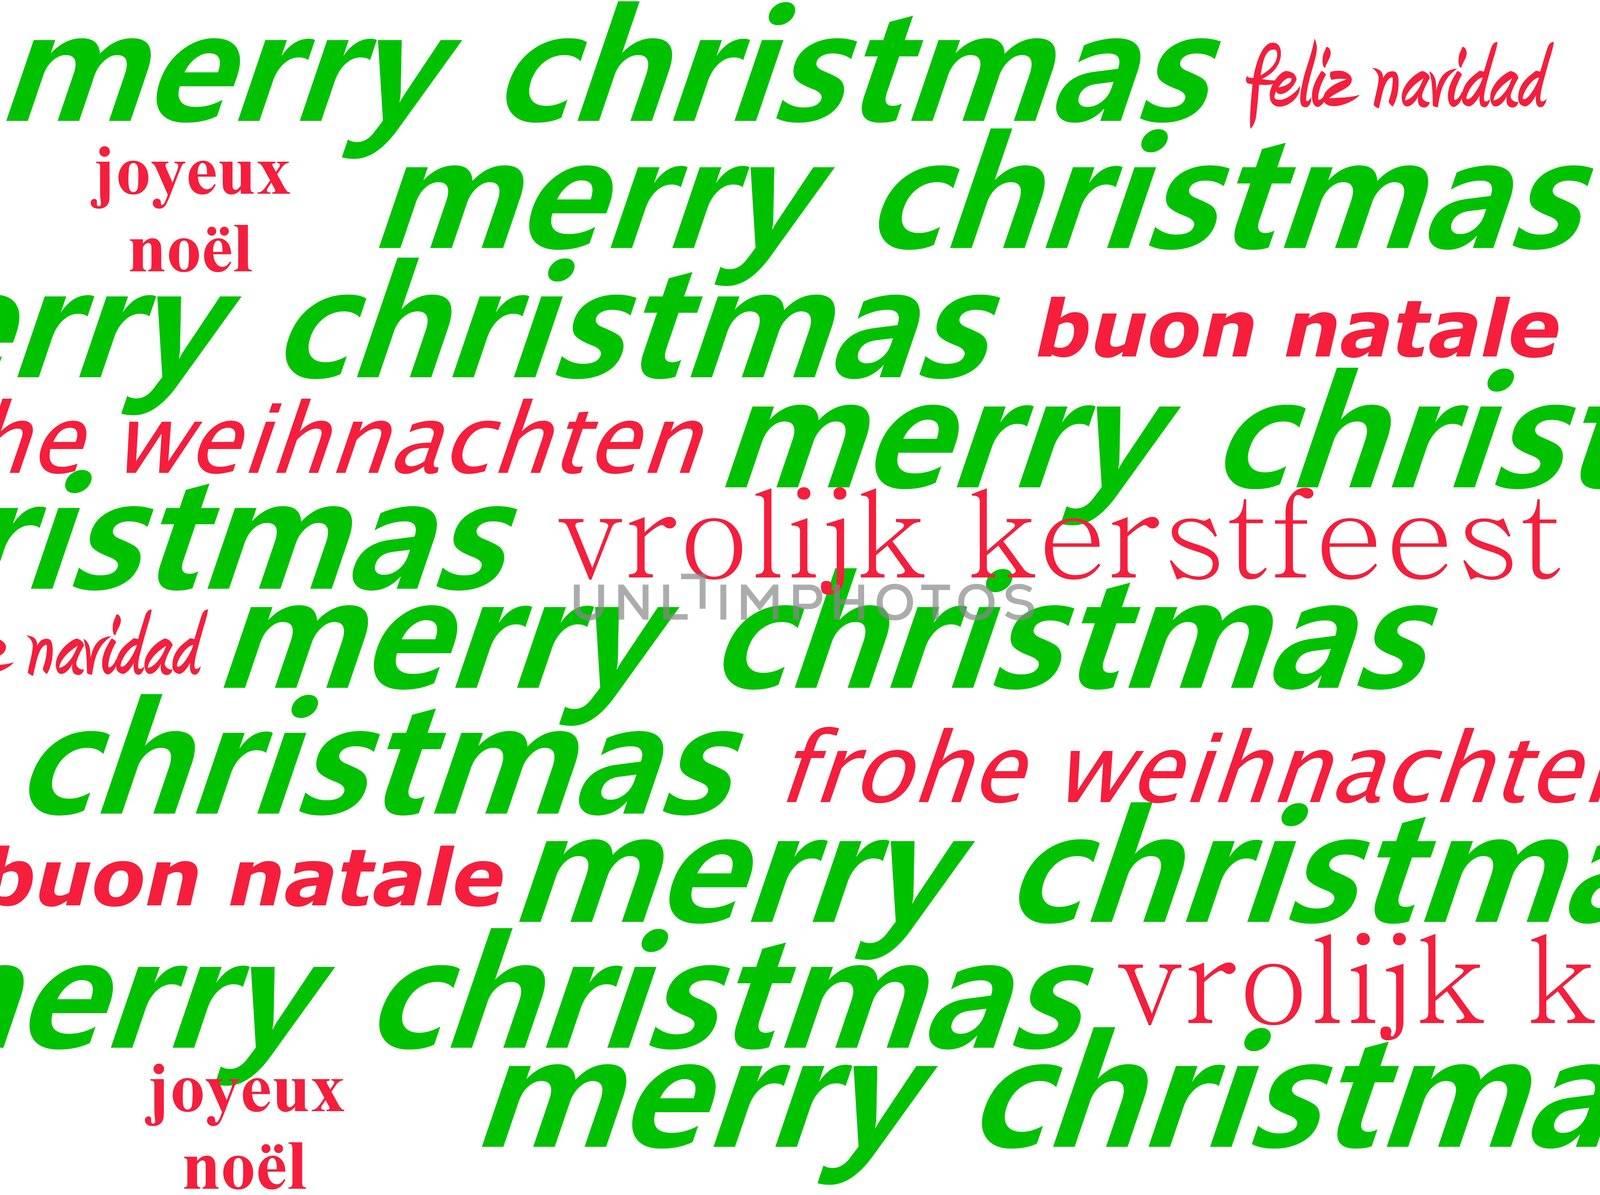 Christmas greeting in multiple languages